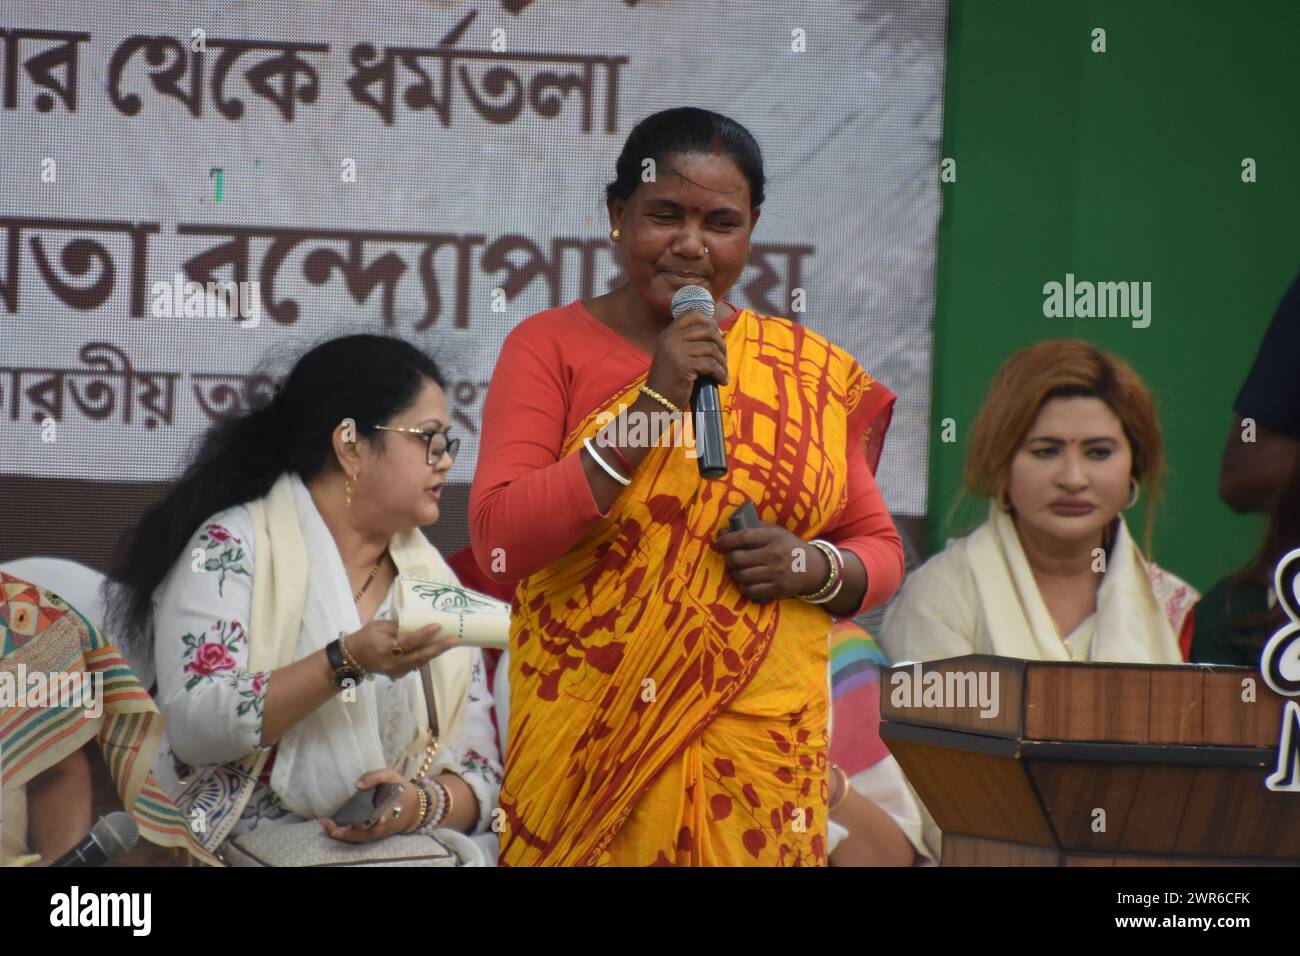 Kolkata, West Bengal, India. 7th Mar, 2024. A Sandeskhali woman talking at the West Bengal Chief Minister and Trinamool Supremo Mamata Banerjee led a women's rally in Kolkata today, responding to Prime Minister Narendra Modi's criticism of the Trinamool Congress over the Sandeshkhali issue. Women from Sandeshkhali island, where allegations against local Trinamool leaders have emerged, also joined. The rally, themed ''Mahilader Adhikar, Amader Angikar'' (women's rights, our commitment), featured Banerjee leading a foot march, accompanied by prominent Trinamool leaders like Sushmita Dev, Shashi Stock Photo